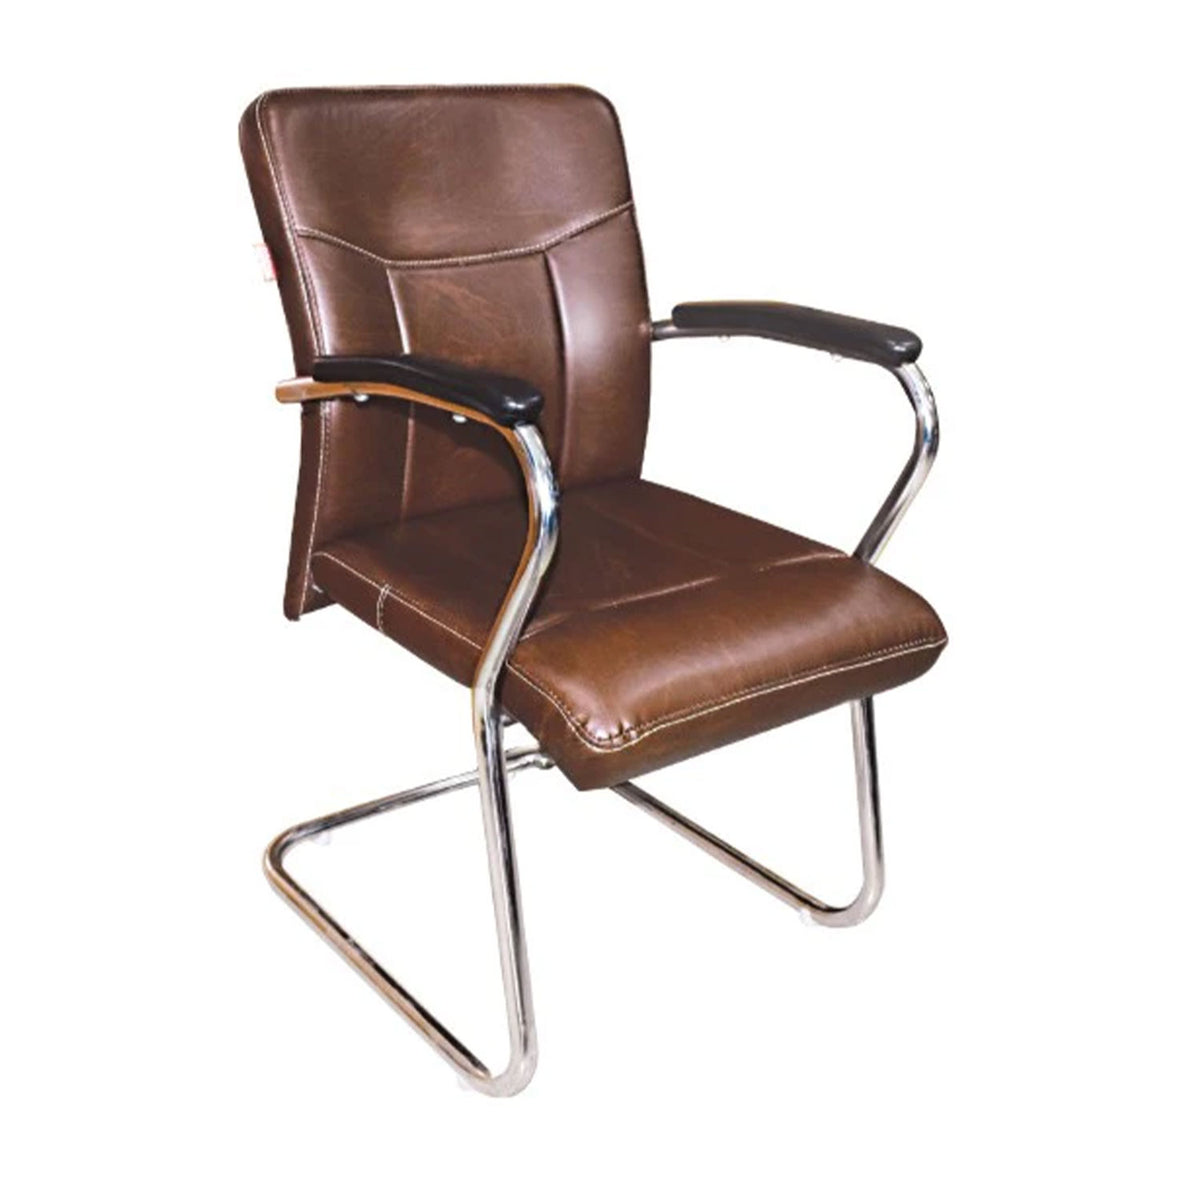 SmileSellers Office Chair Executive Visitor Study Chair with arm Rest with Steel Frame and cushoined seat Back